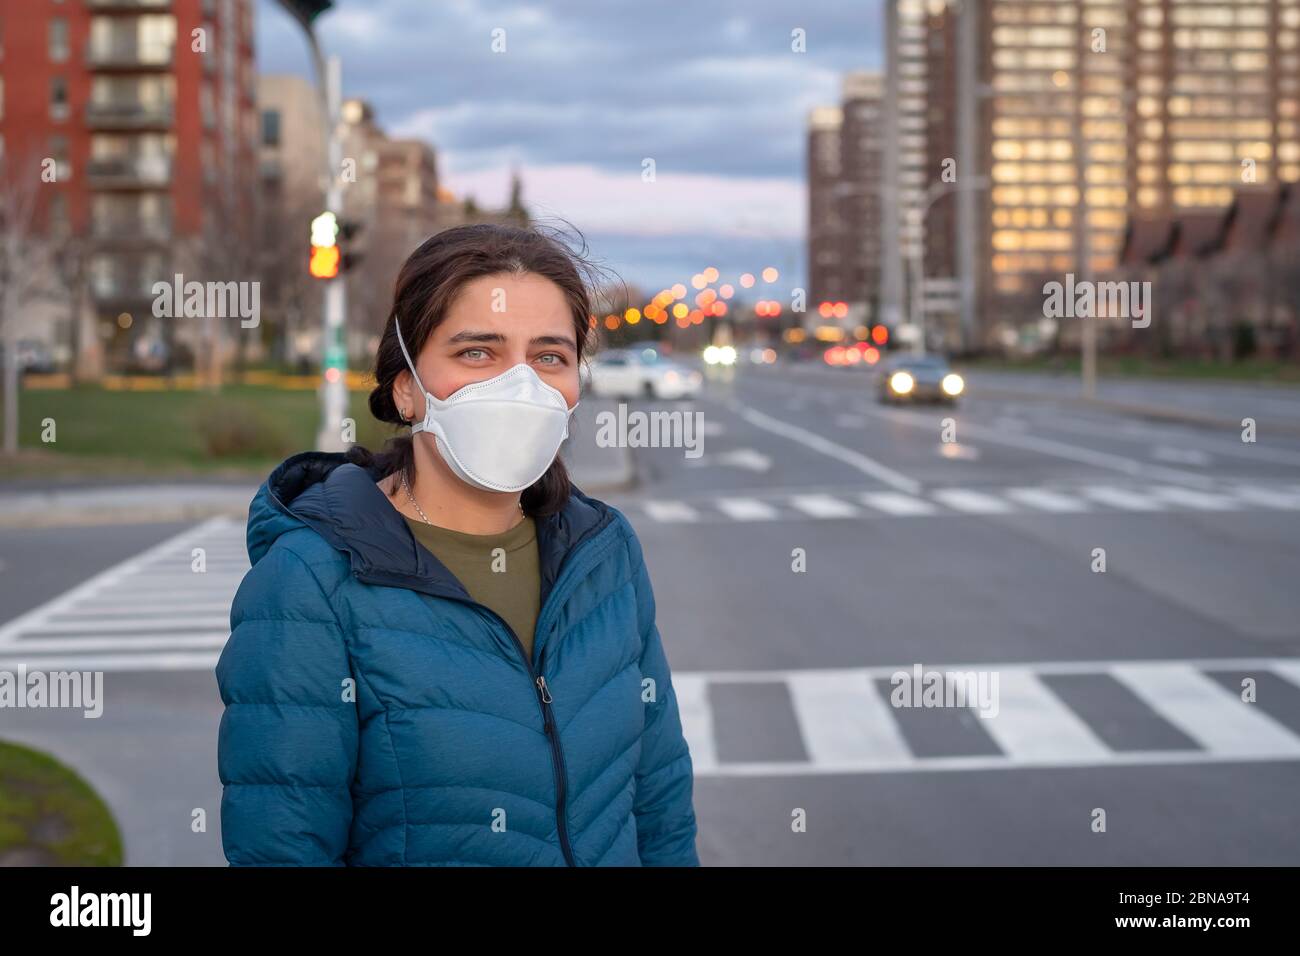 Covid-19 pandemic coronavirus concept. Young beautiful woman in protective medical face mask standing on street by the road. Stock Photo